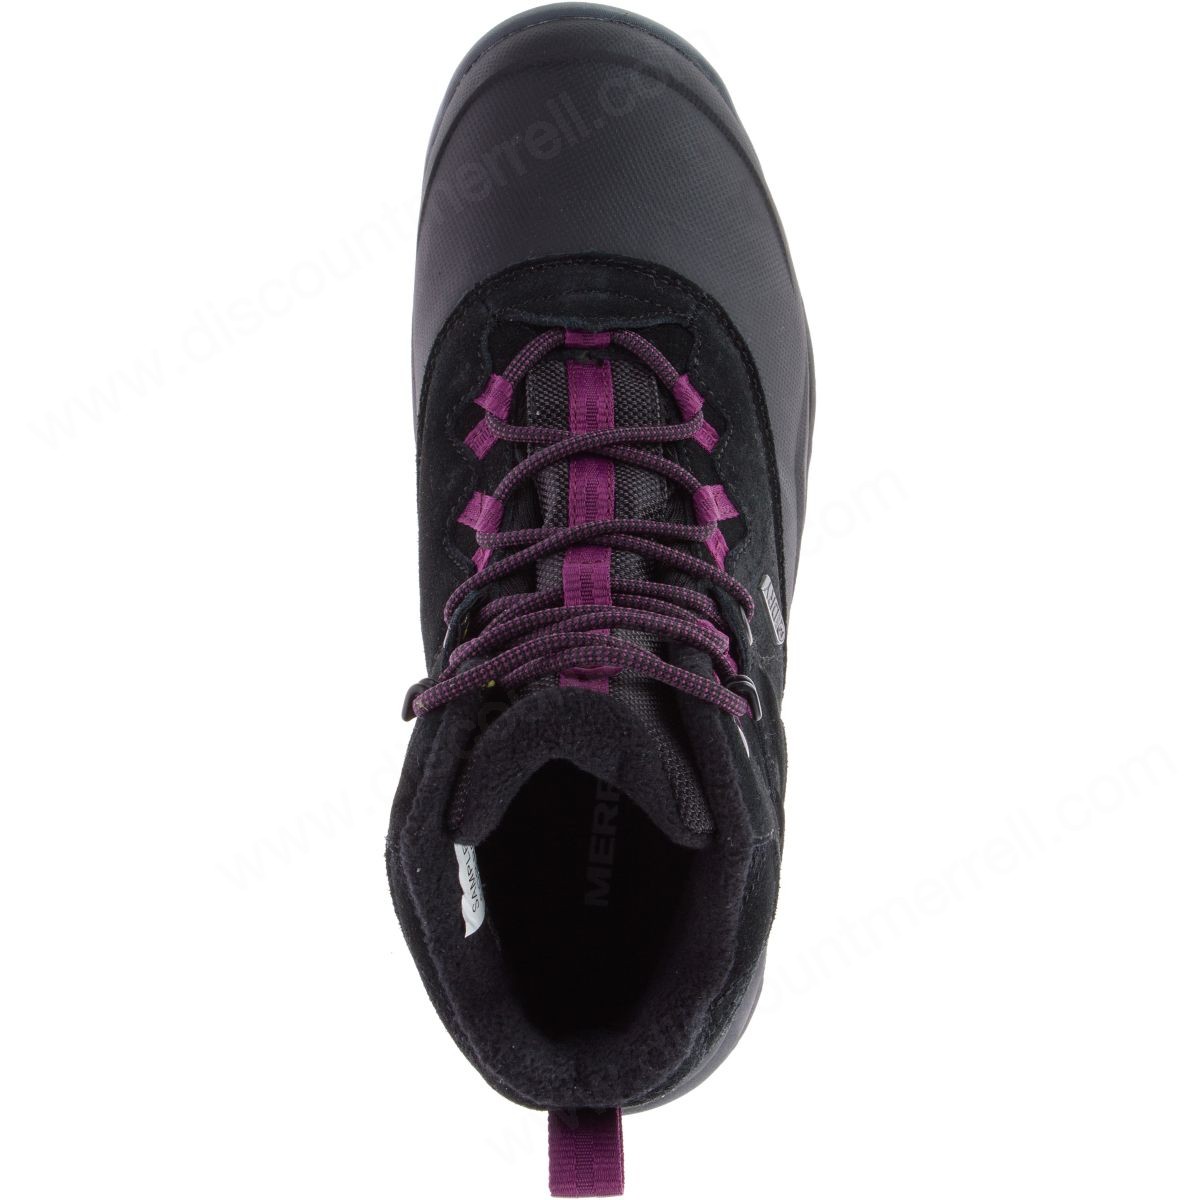 Merrell Lady's Thermo Shiver " Waterproof Black - -2